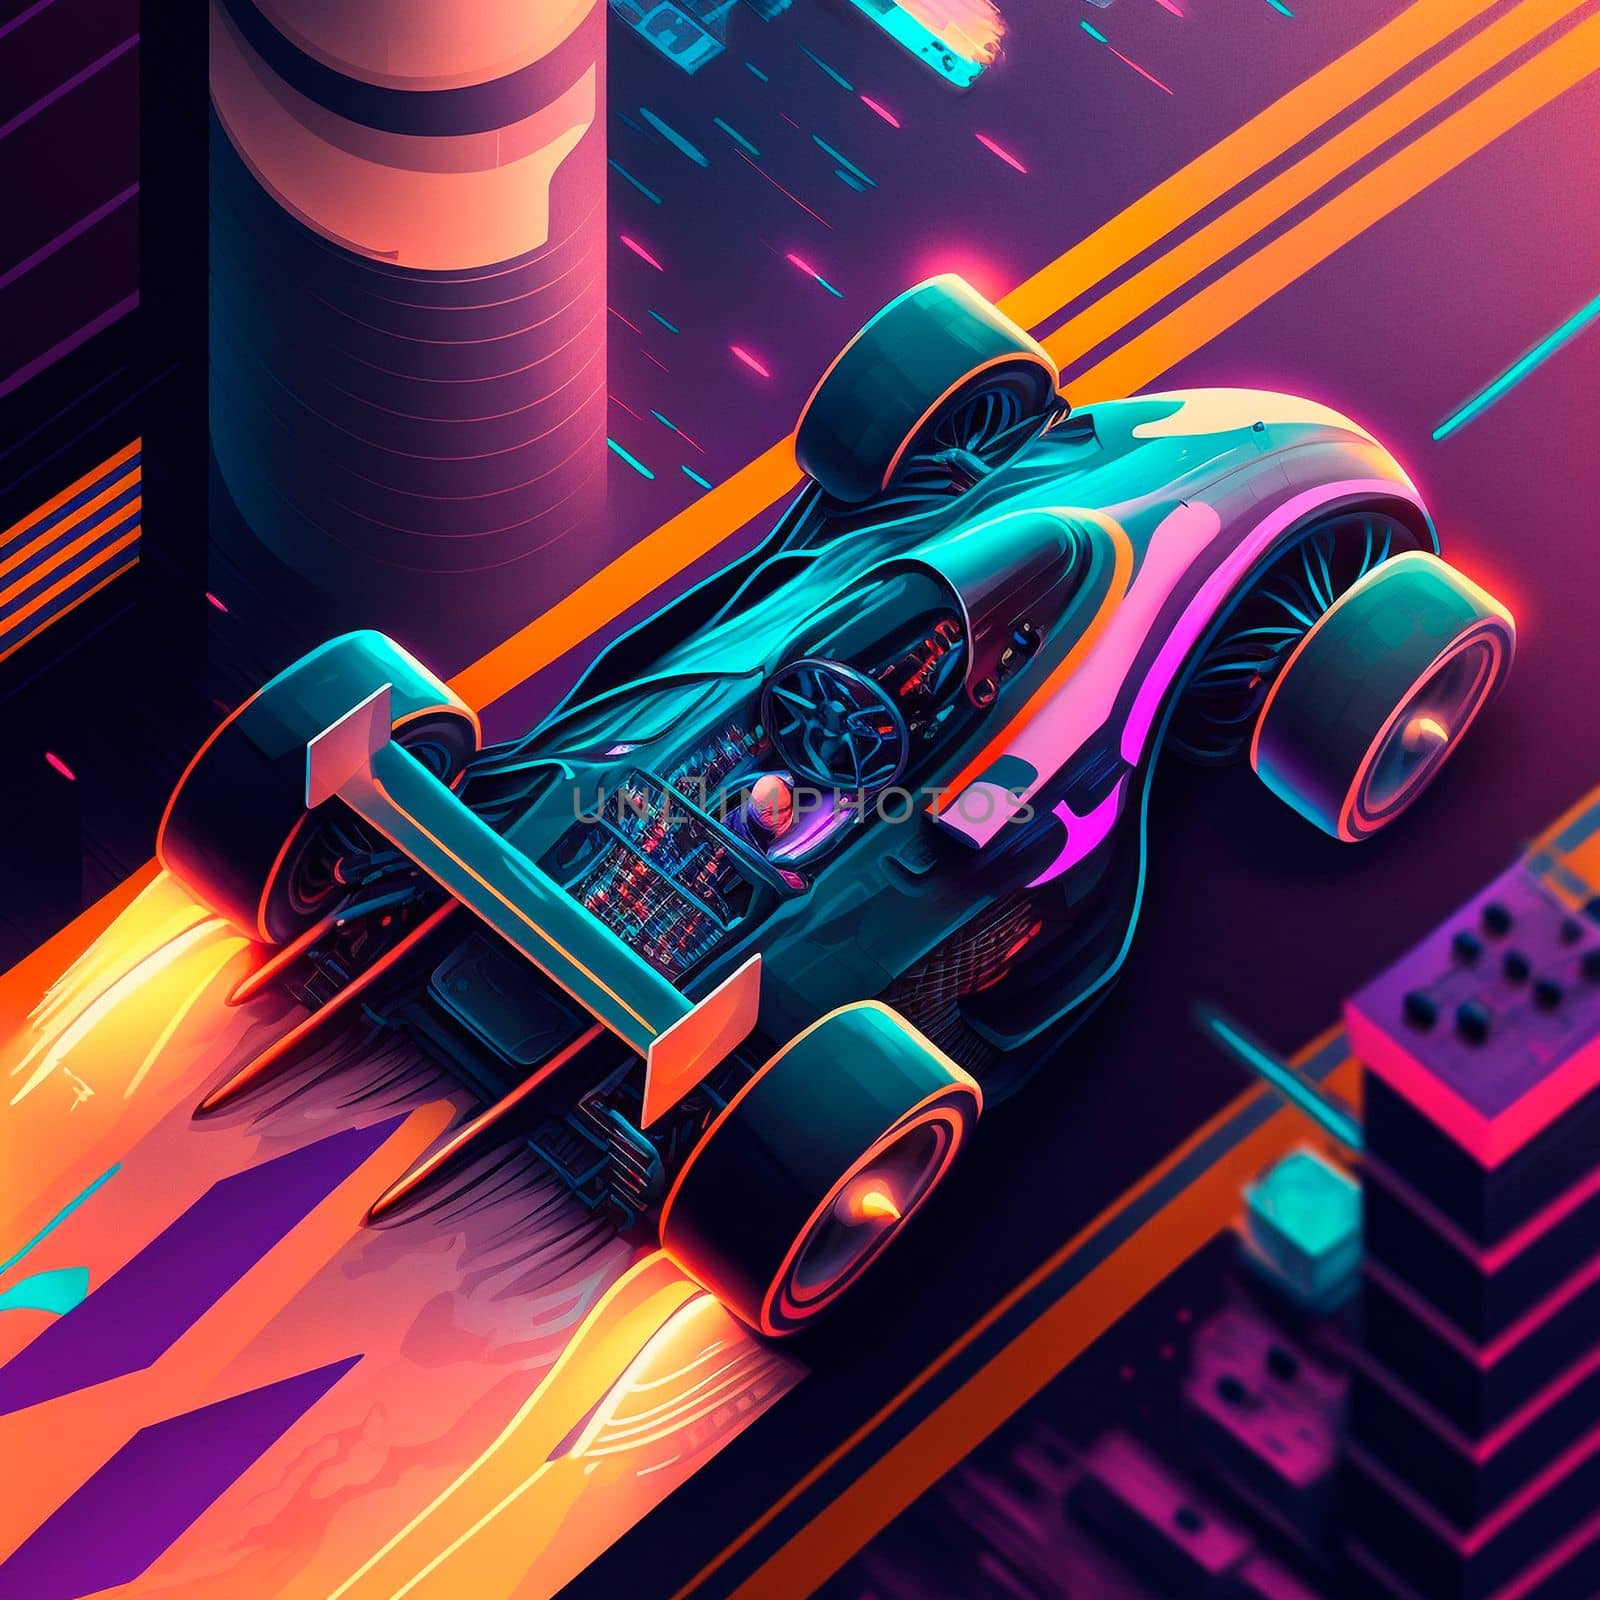 Neon racing car of the future rushes along the roads of the night city. Backlight, neon, isometry by NeuroSky